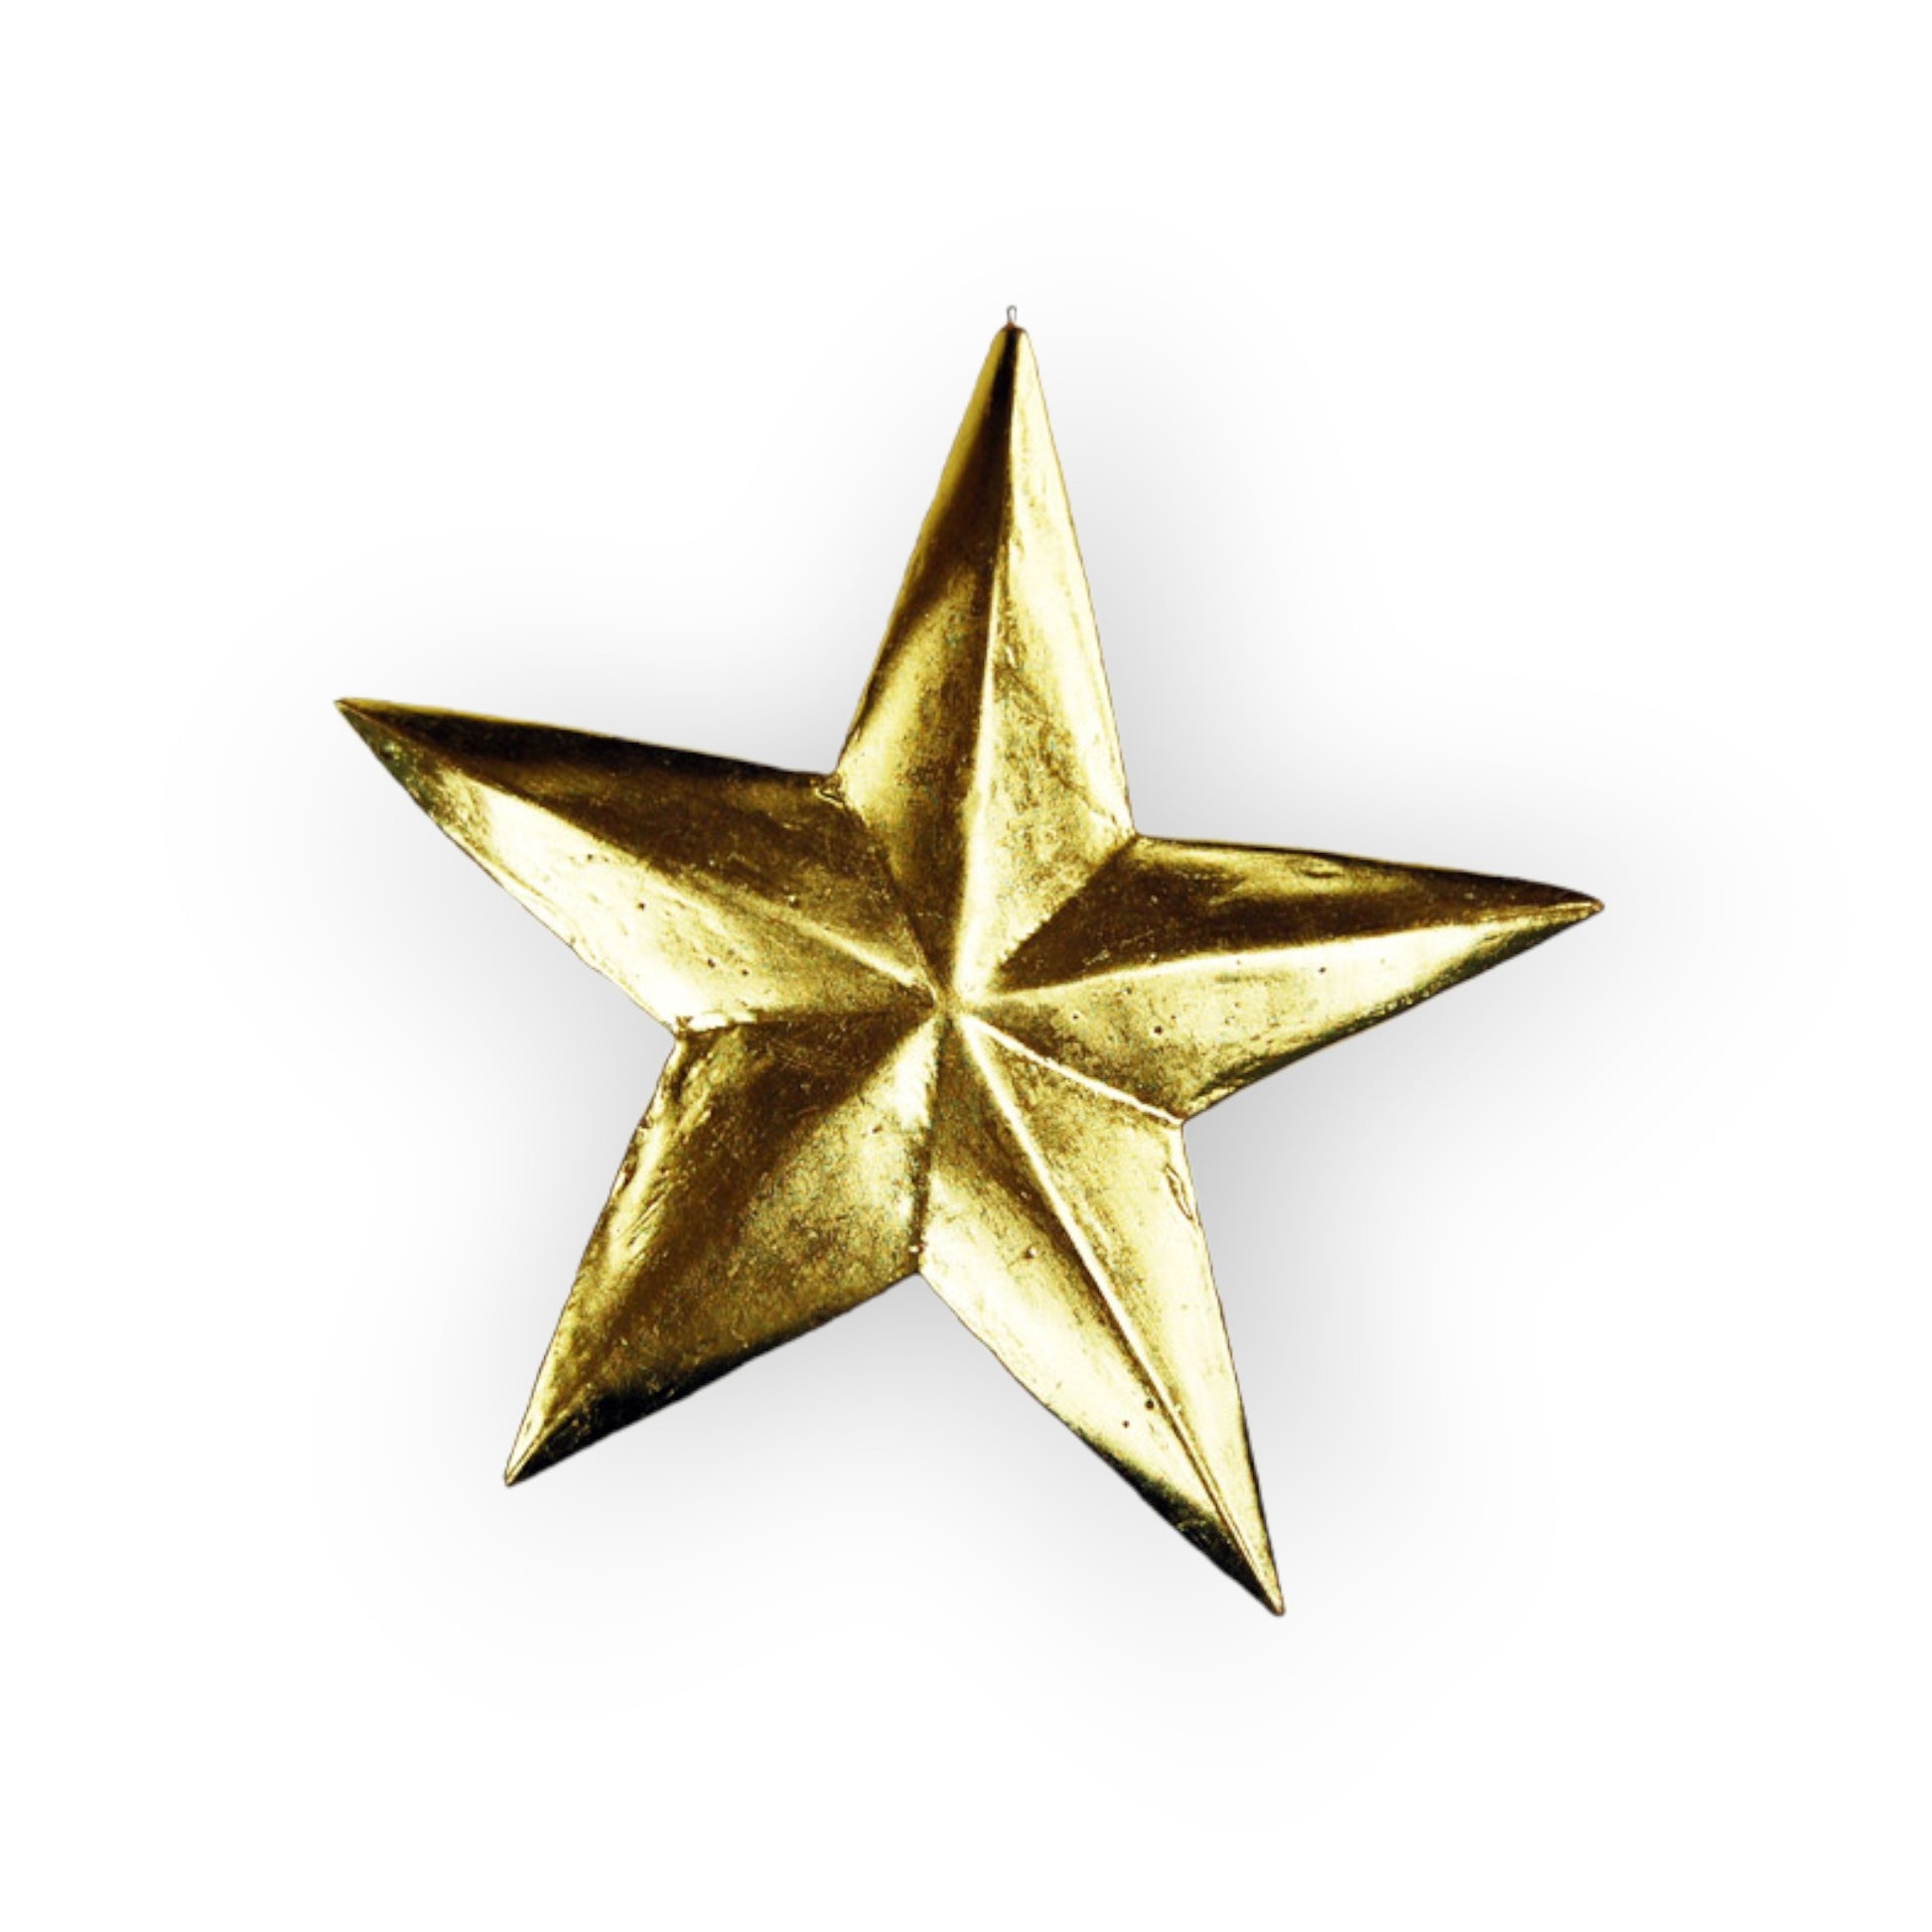 GoldenStar Crafted from Wood Fibers